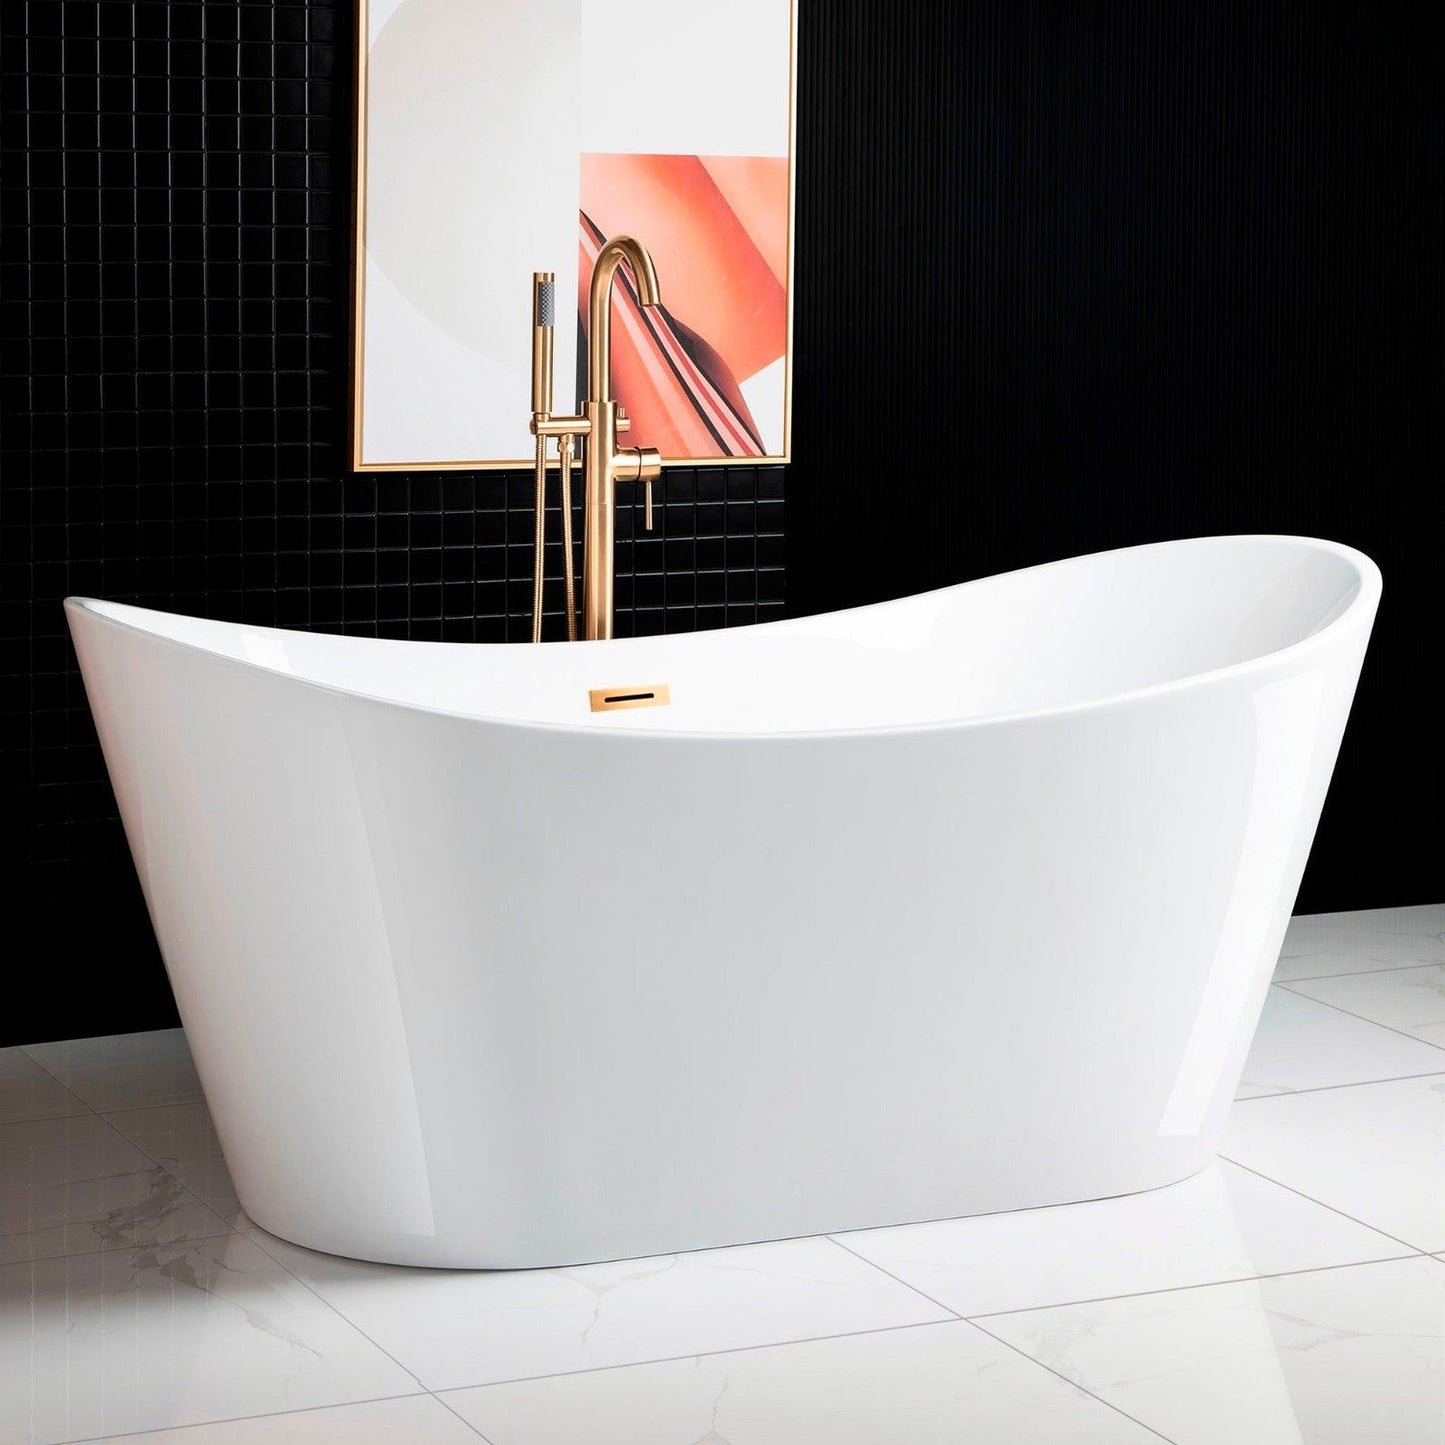 WoodBridge B0010 67" White Acrylic Freestanding Contemporary Soaking Bathtub With Brushed Gold Drain, Overflow, F0073BGVT Tub Filler and Caddy Tray